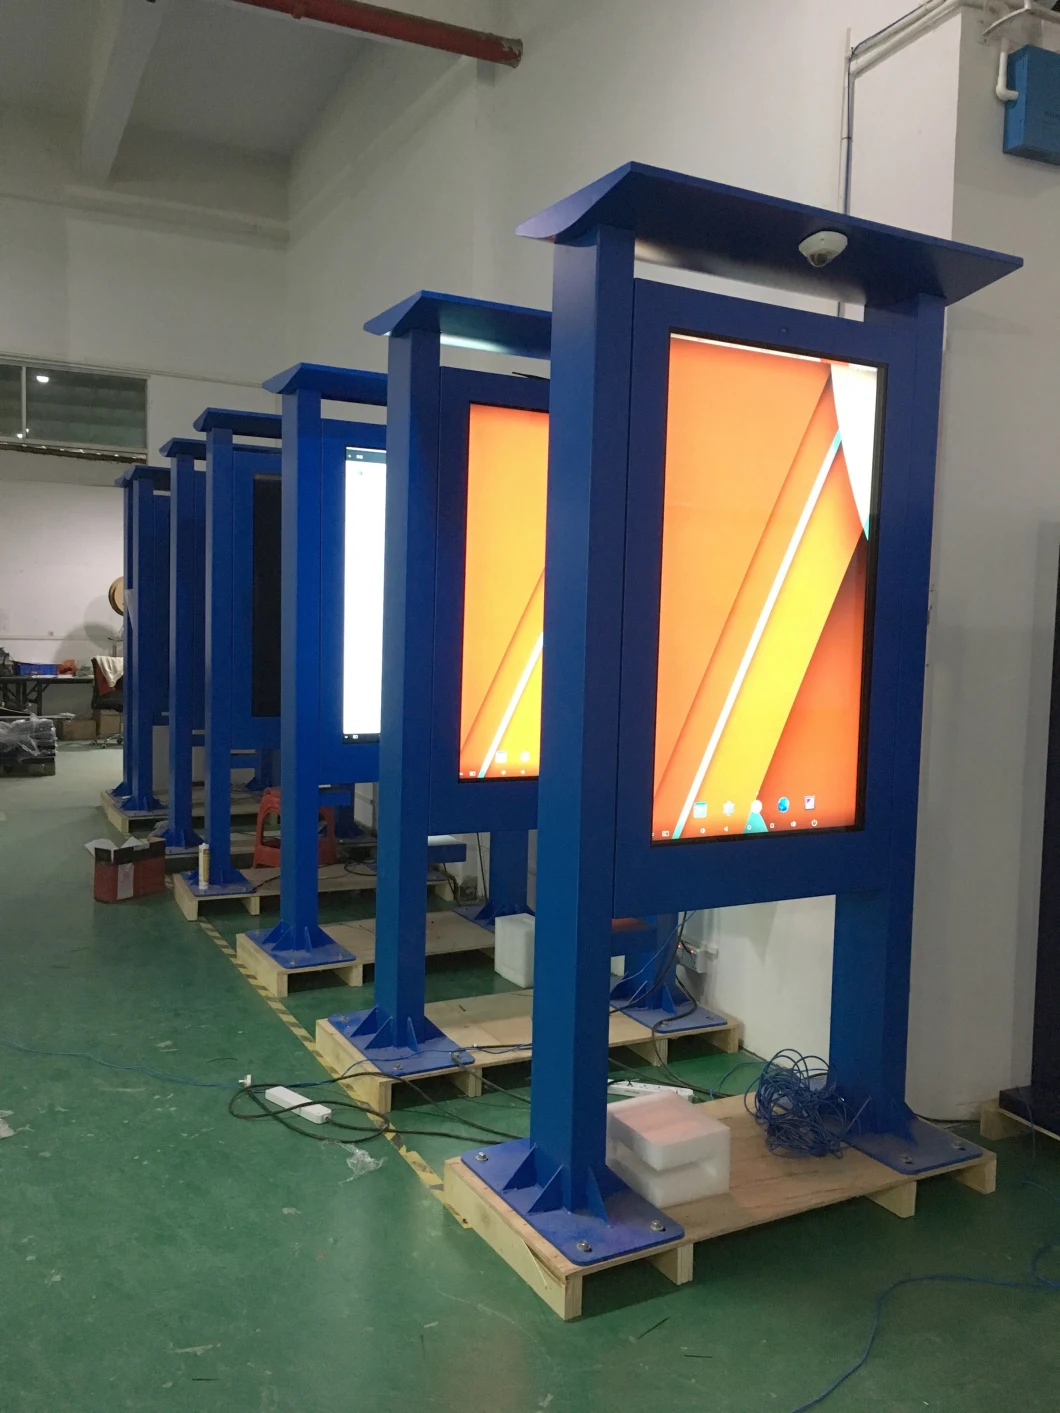 All Size Waterproof Outdoor Touch Screen Kiosk, LCD Kiosk Display Outdoor, Outdoor Digital Signage Kiosk